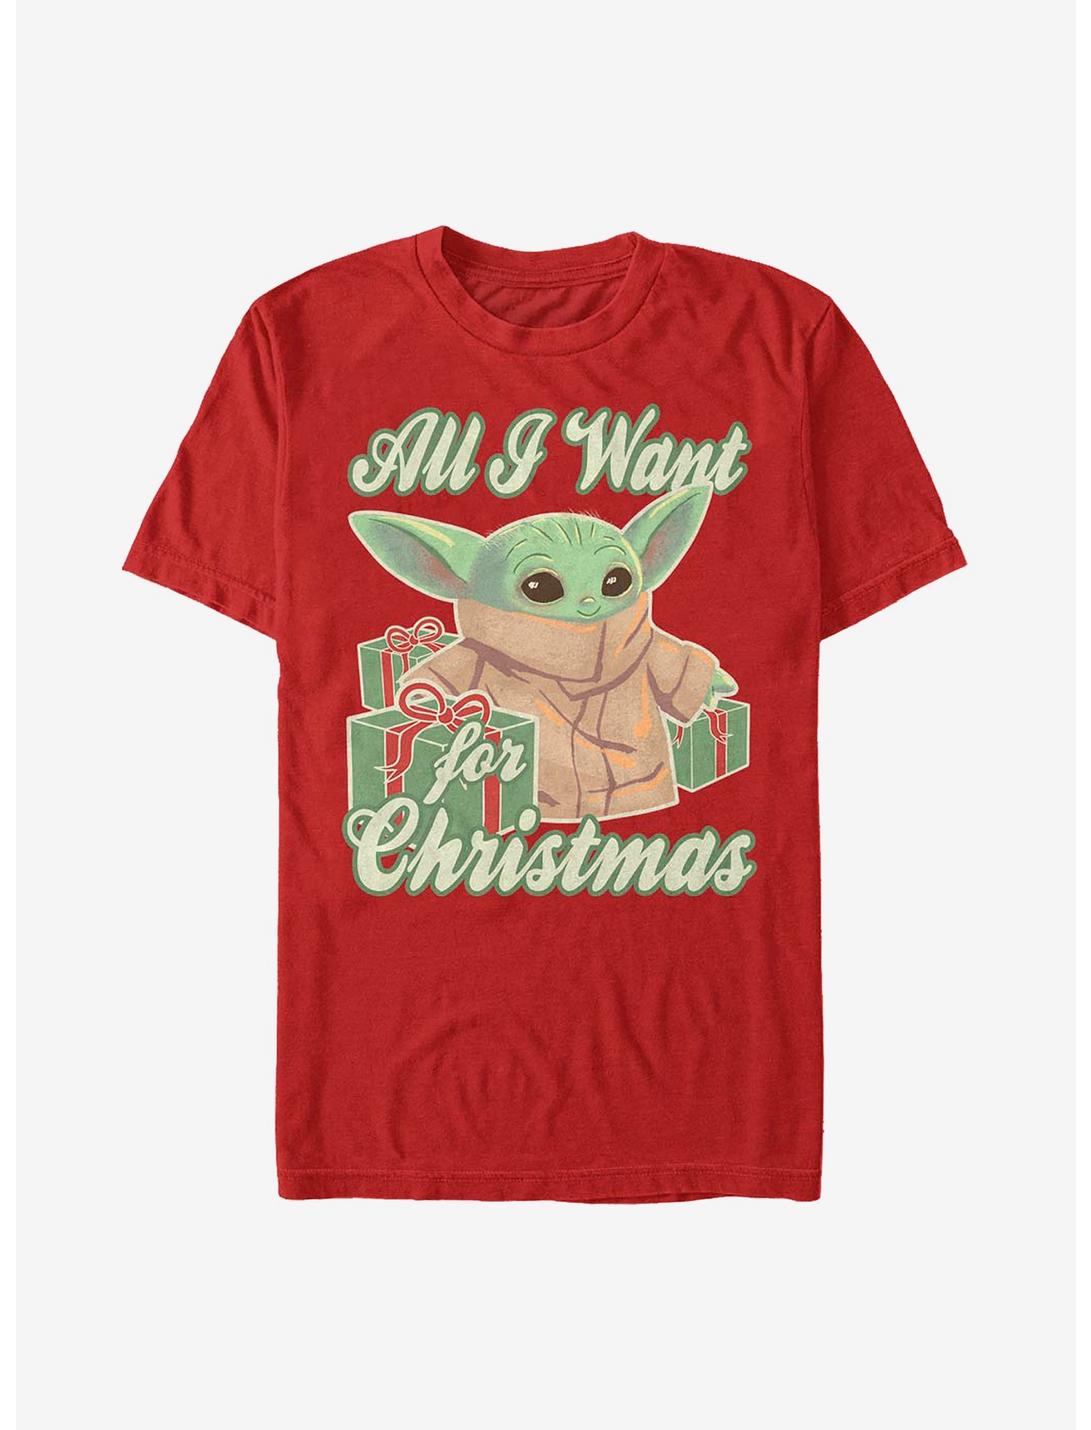 Star Wars The Mandalorian The Child Christmas Baby T-Shirt, RED, hi-res